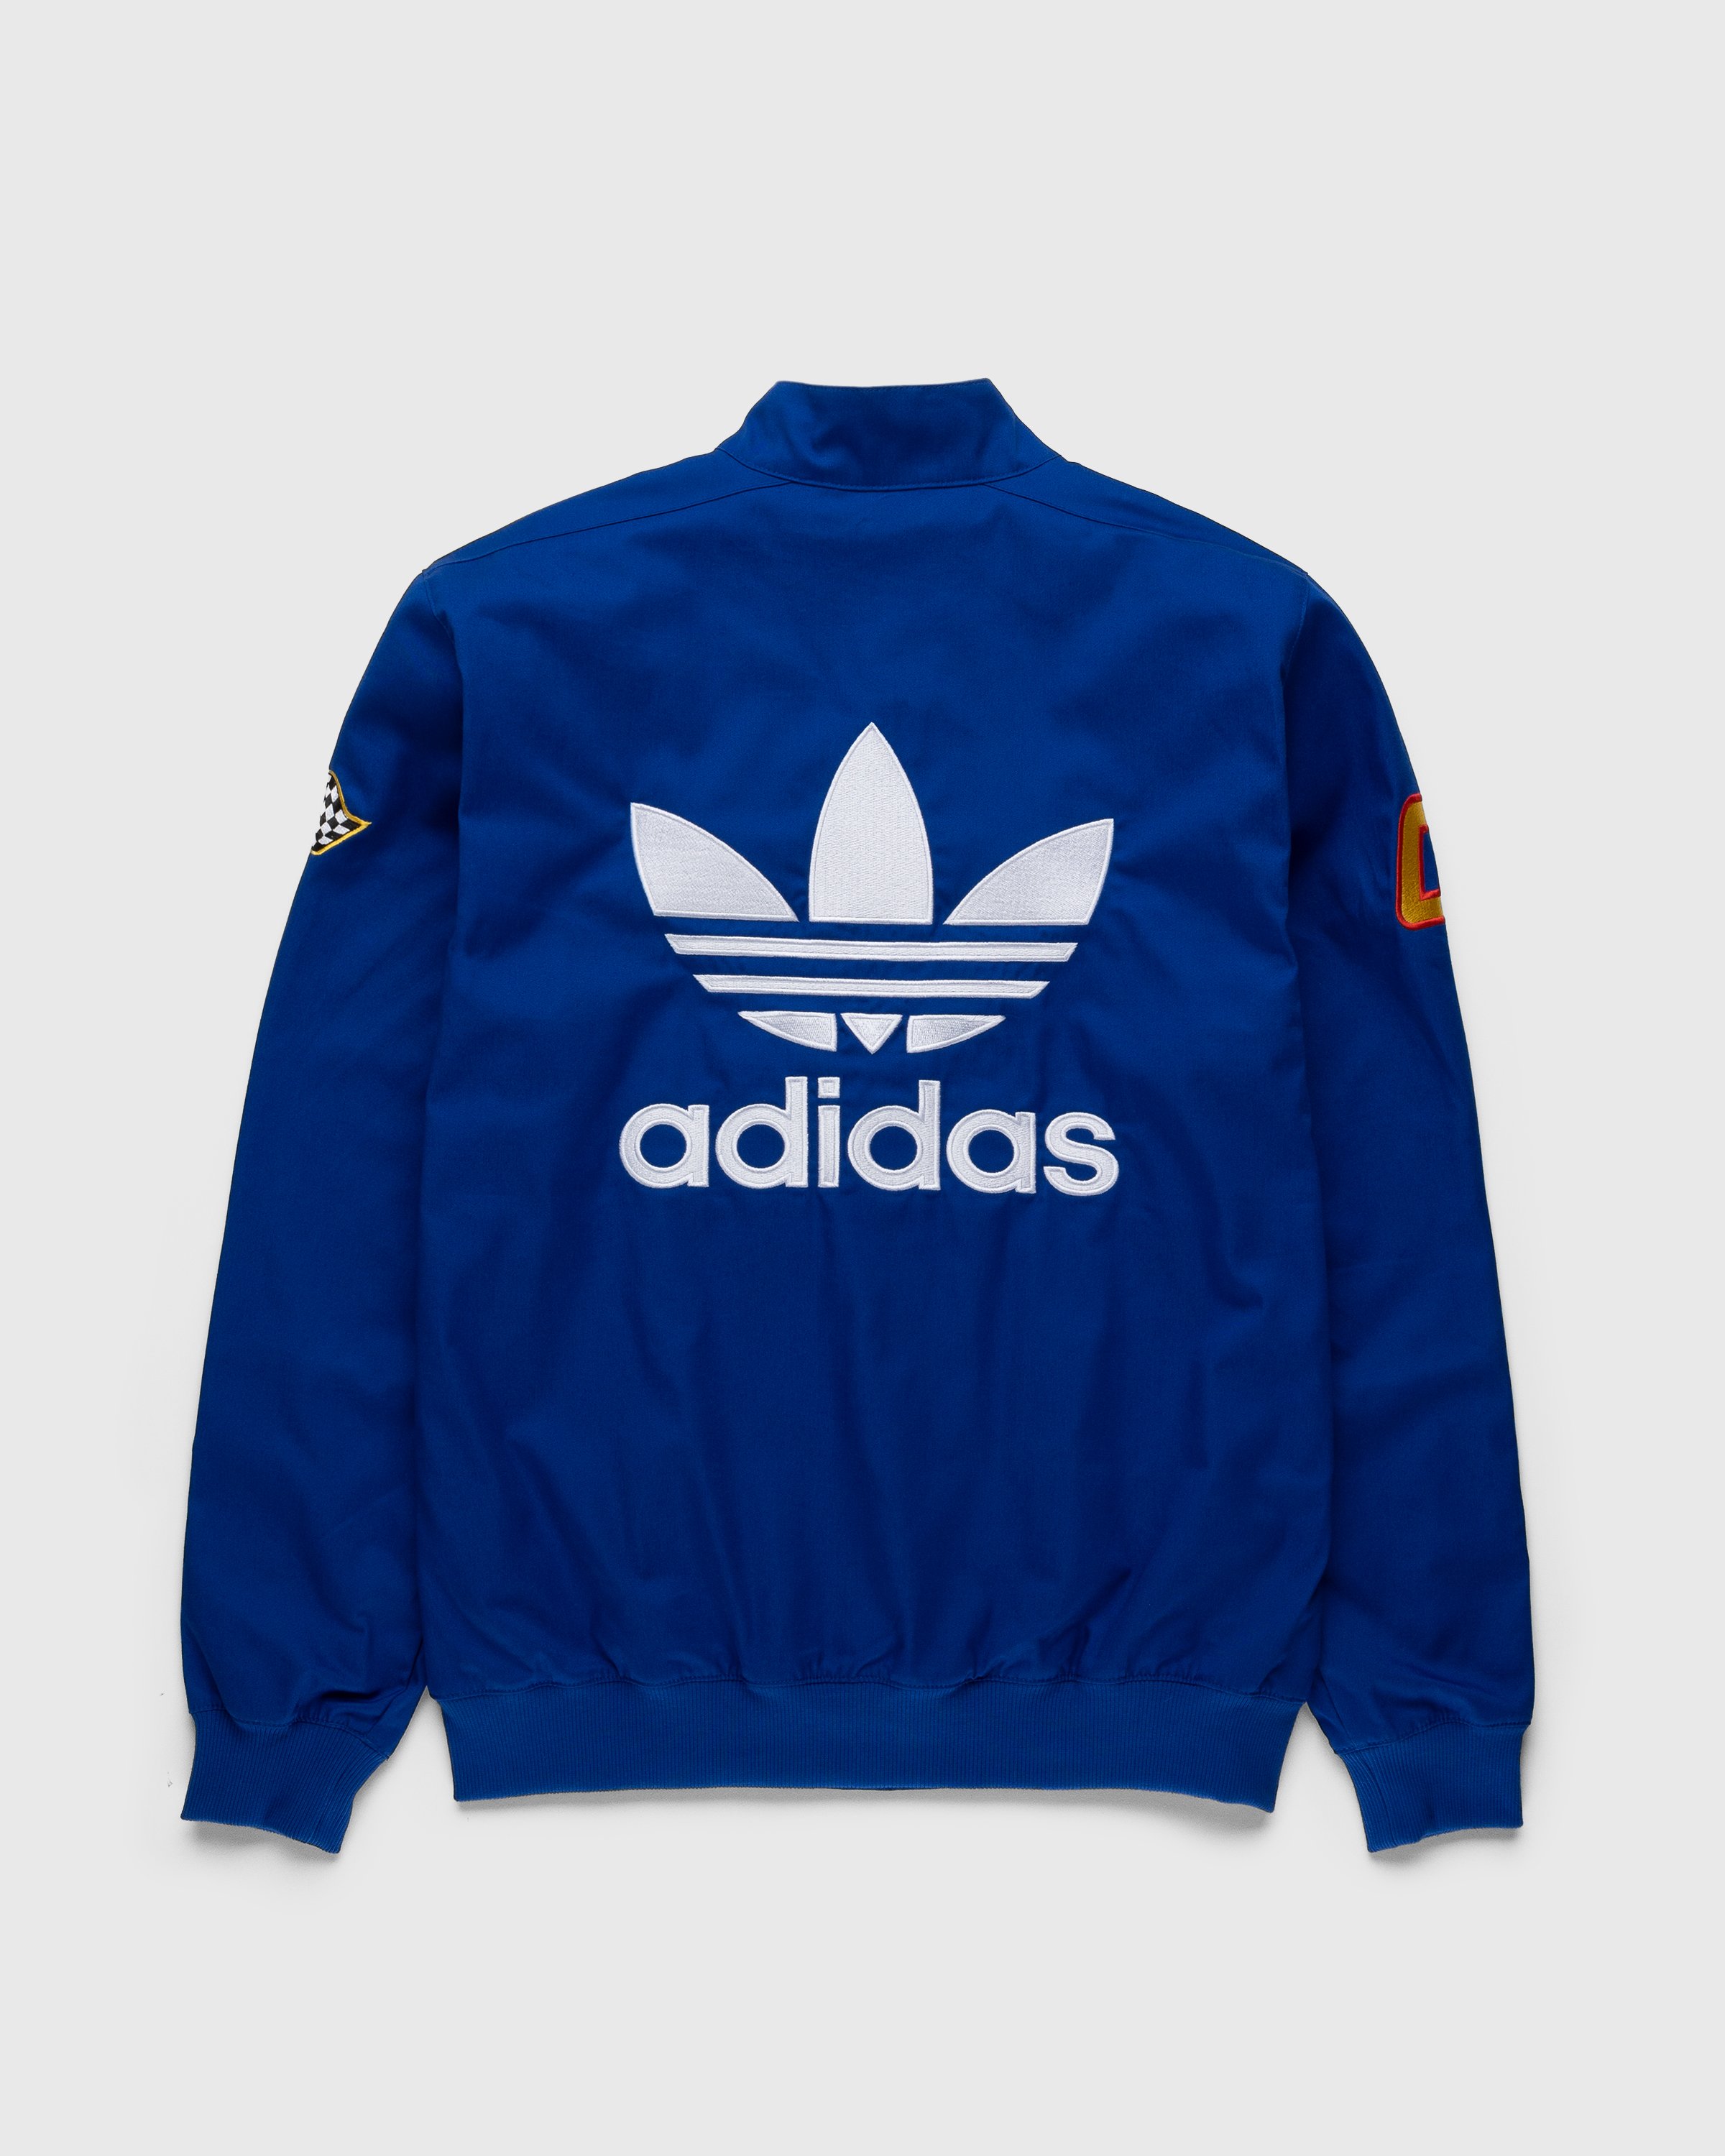 Adidas - Sean Wotherspoon x Hot Wheels Race Jacket Blue - Clothing - Blue - Image 2